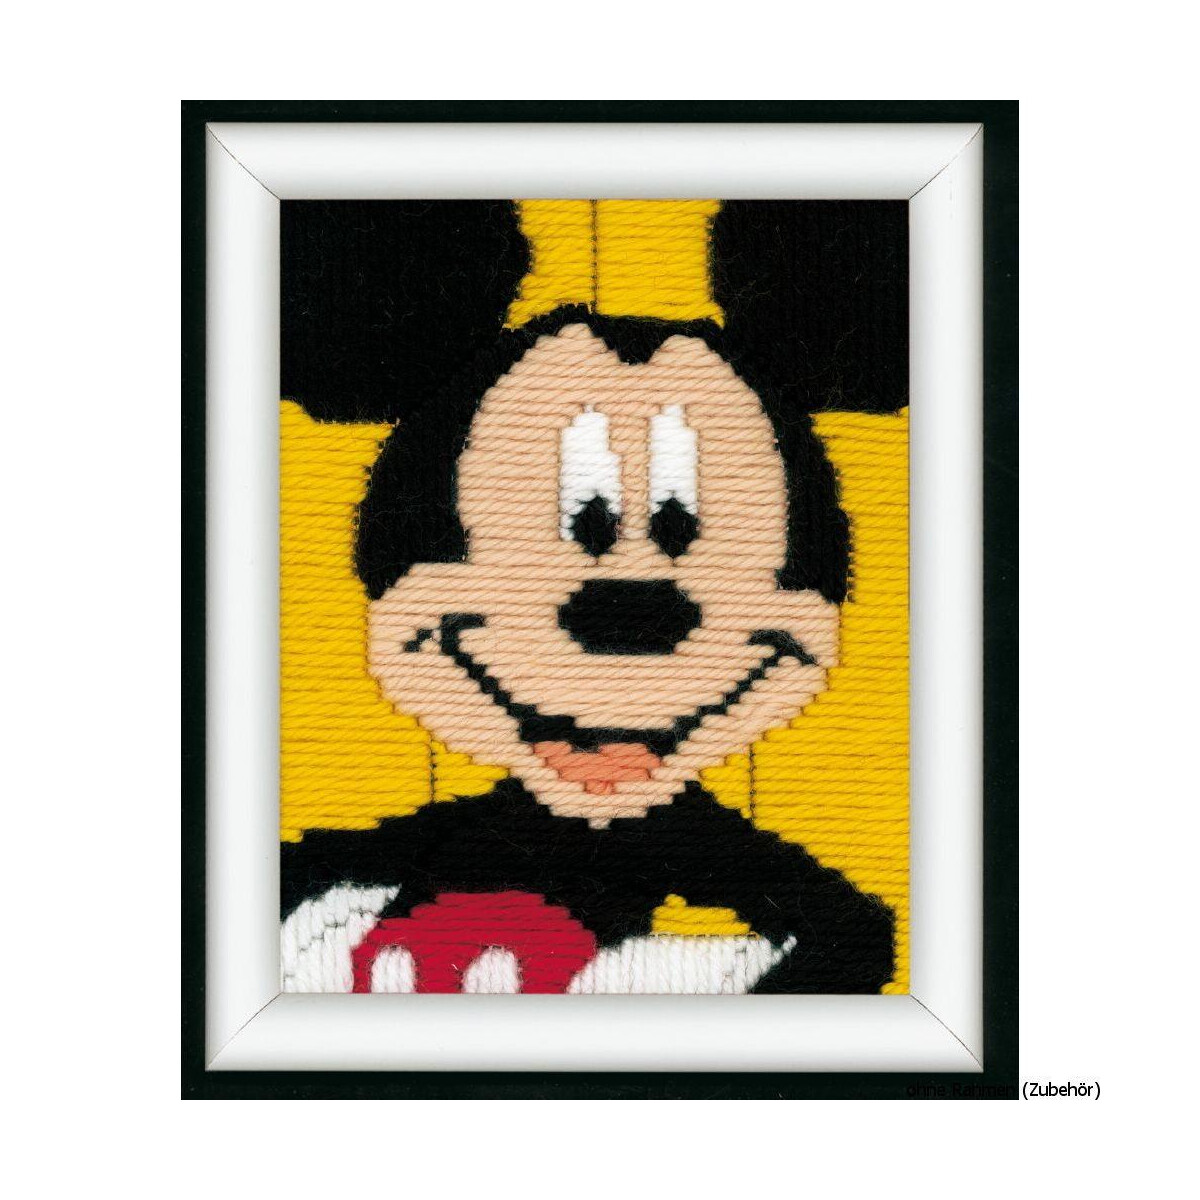 Vervaco Spannstich Stickpackung "Mickey Mouse",...